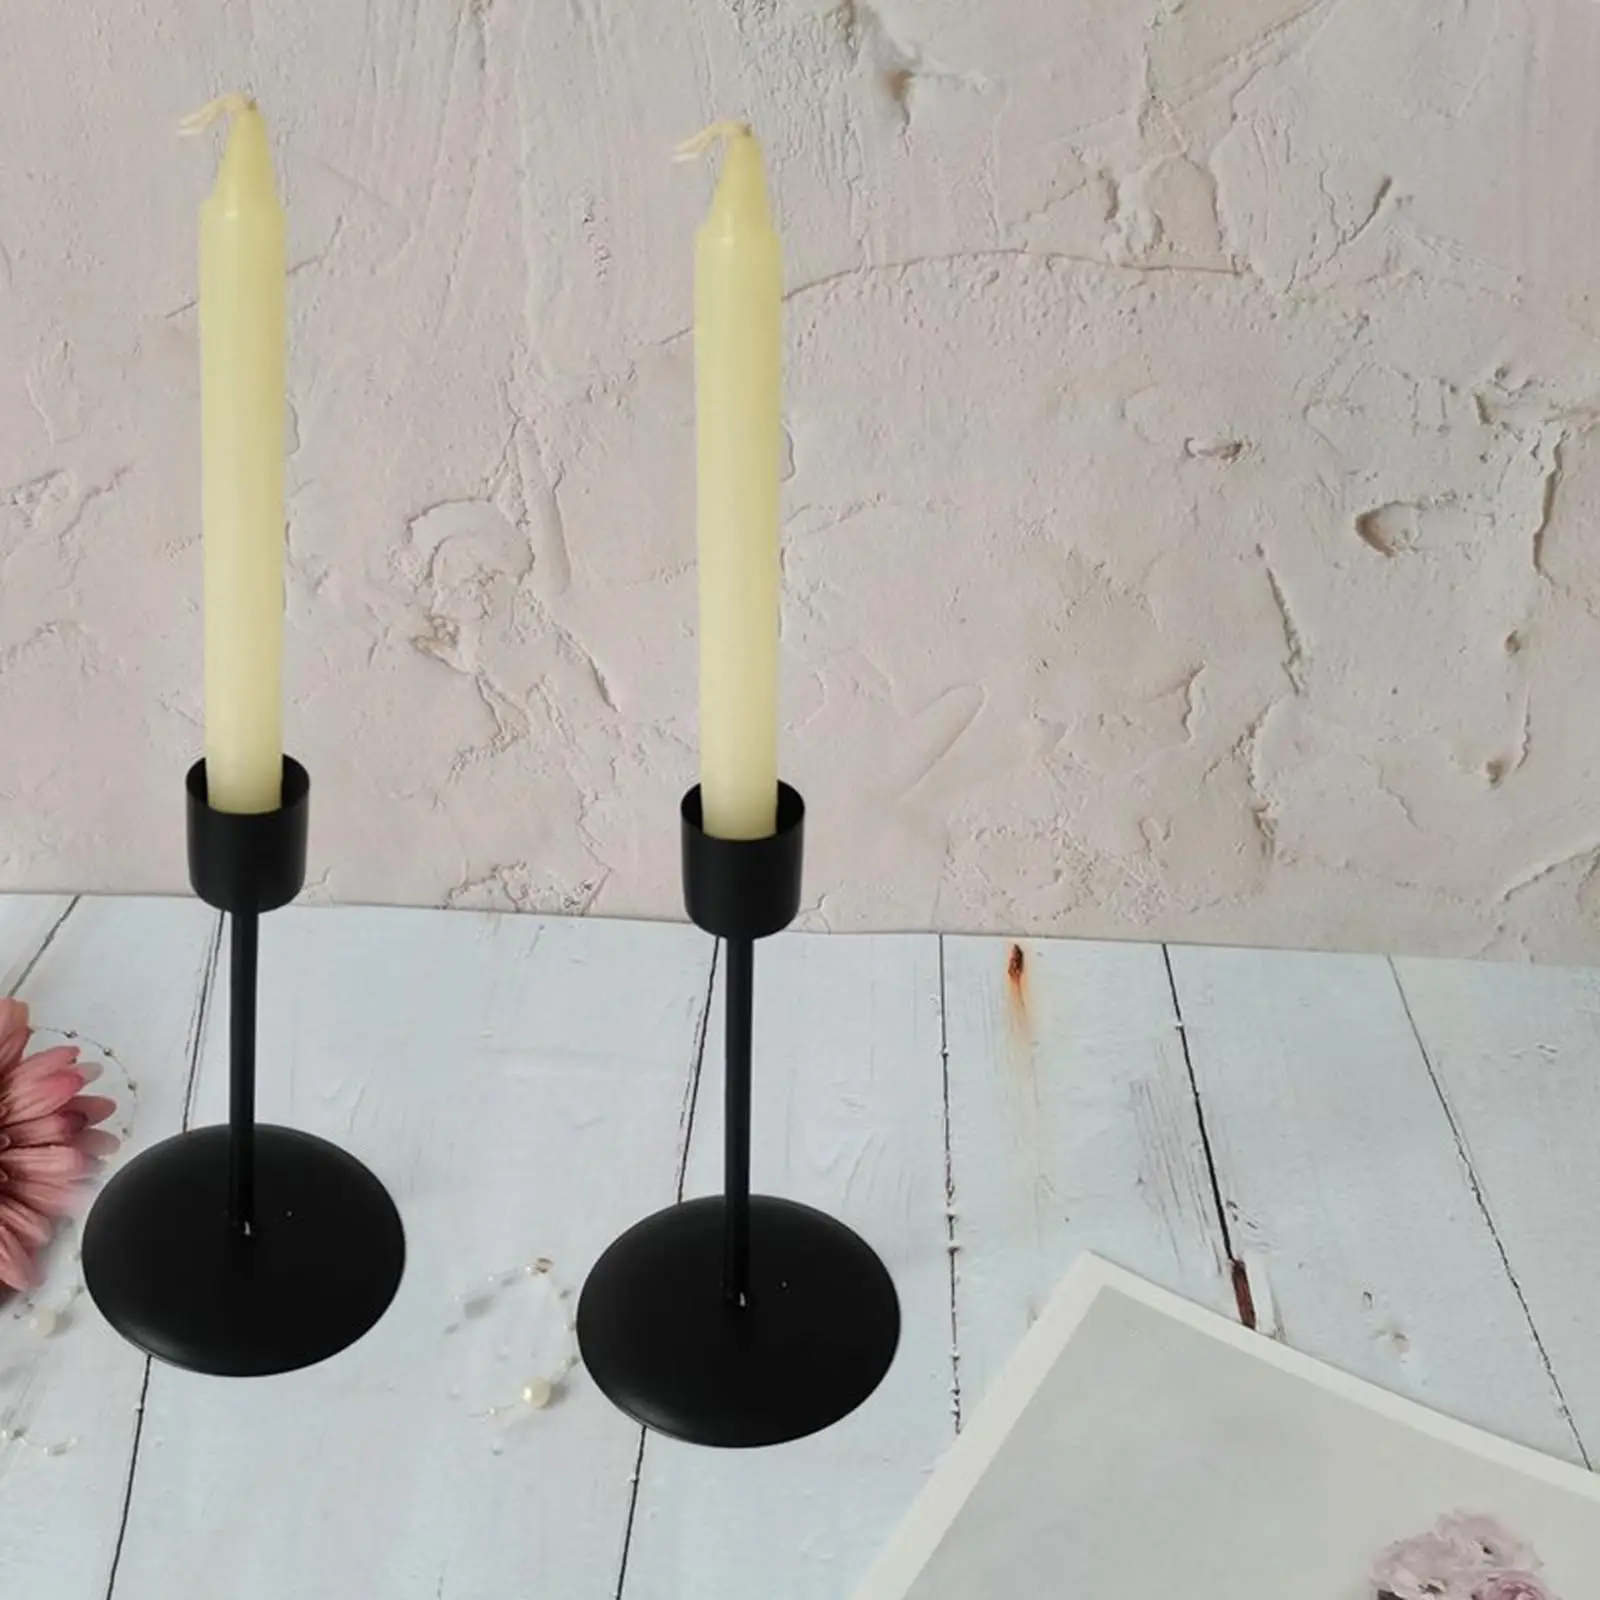   Taper Candle Holder Candlestick Table Centerpiece Birthdayr